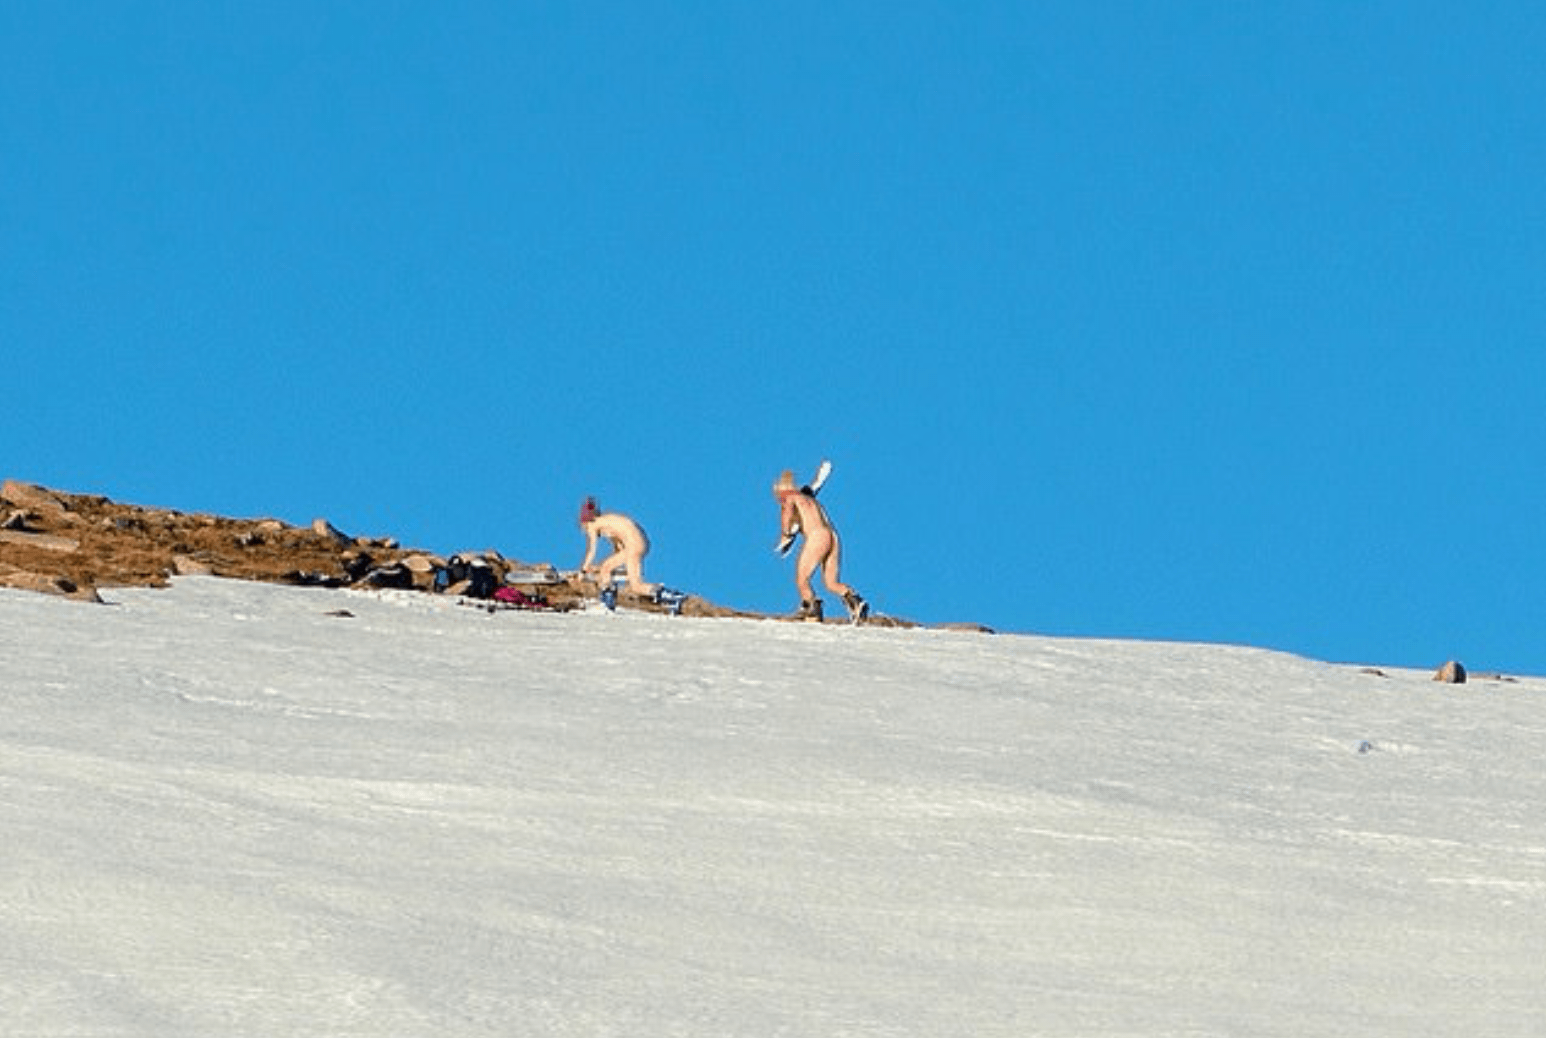 david wray recommends Snow Skiing Nude